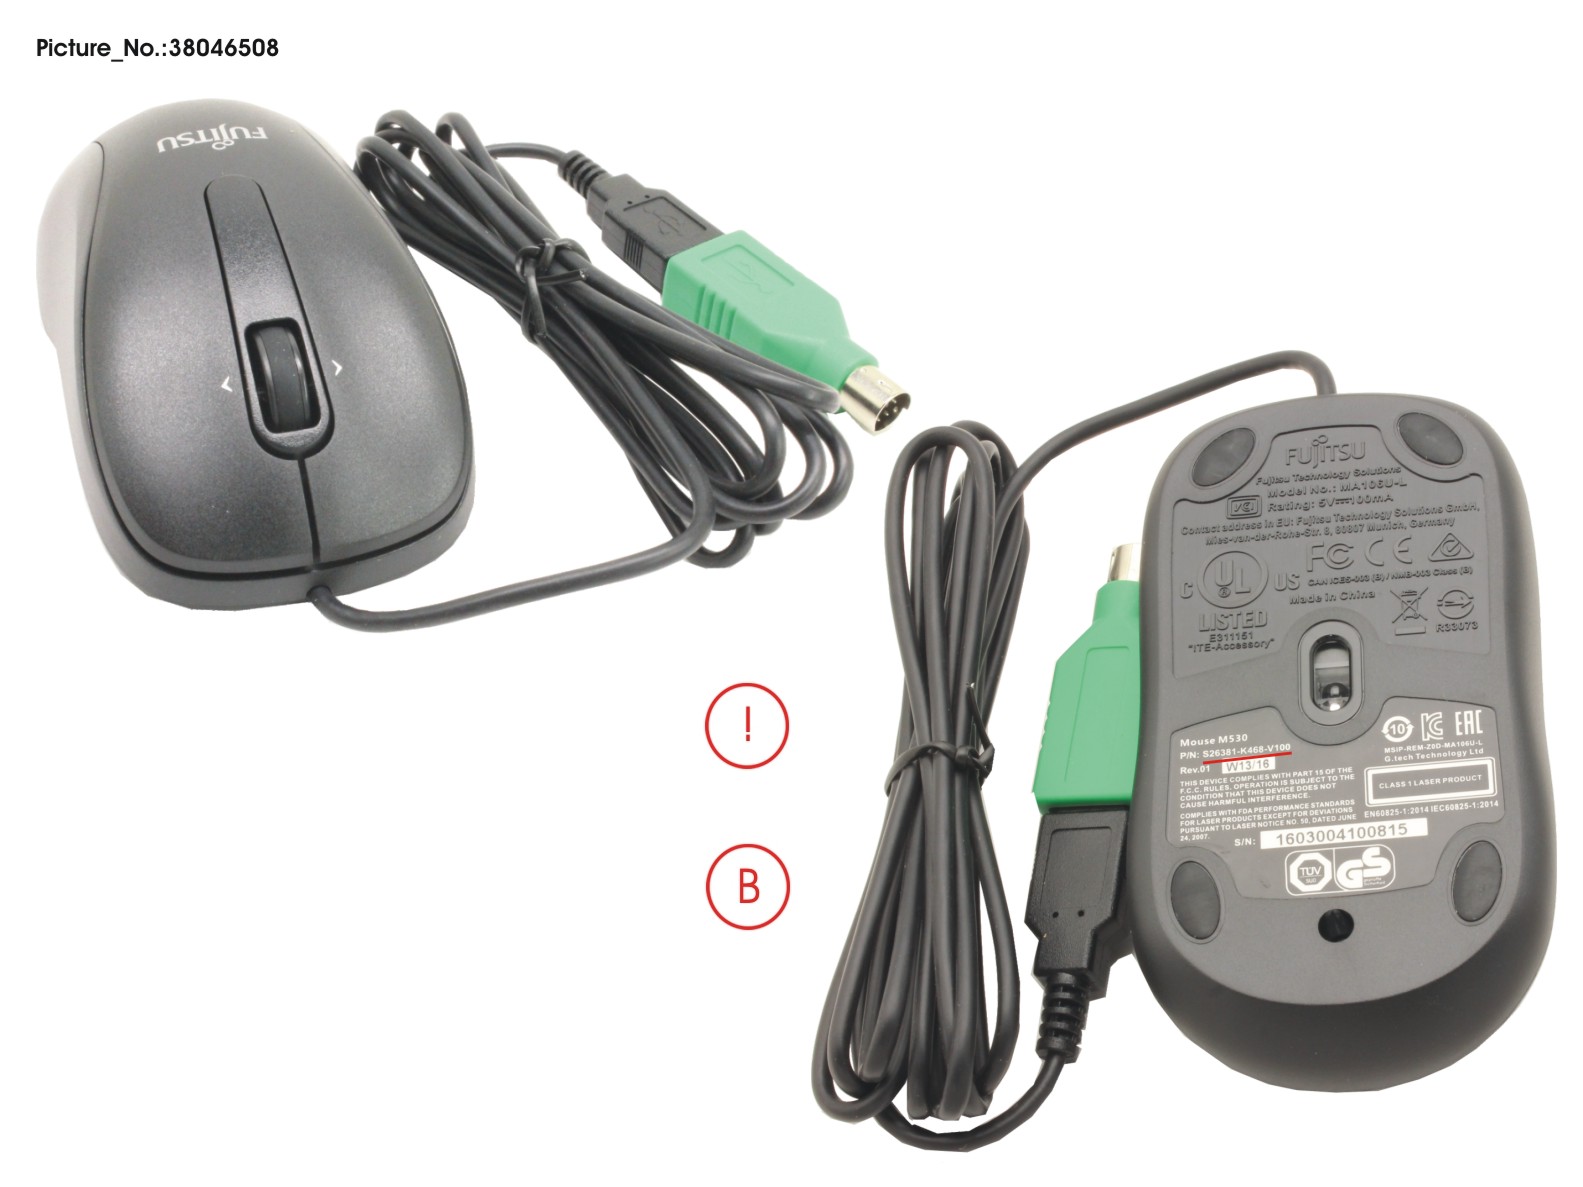 MOUSE M530 BLACK USB WITH PS2 